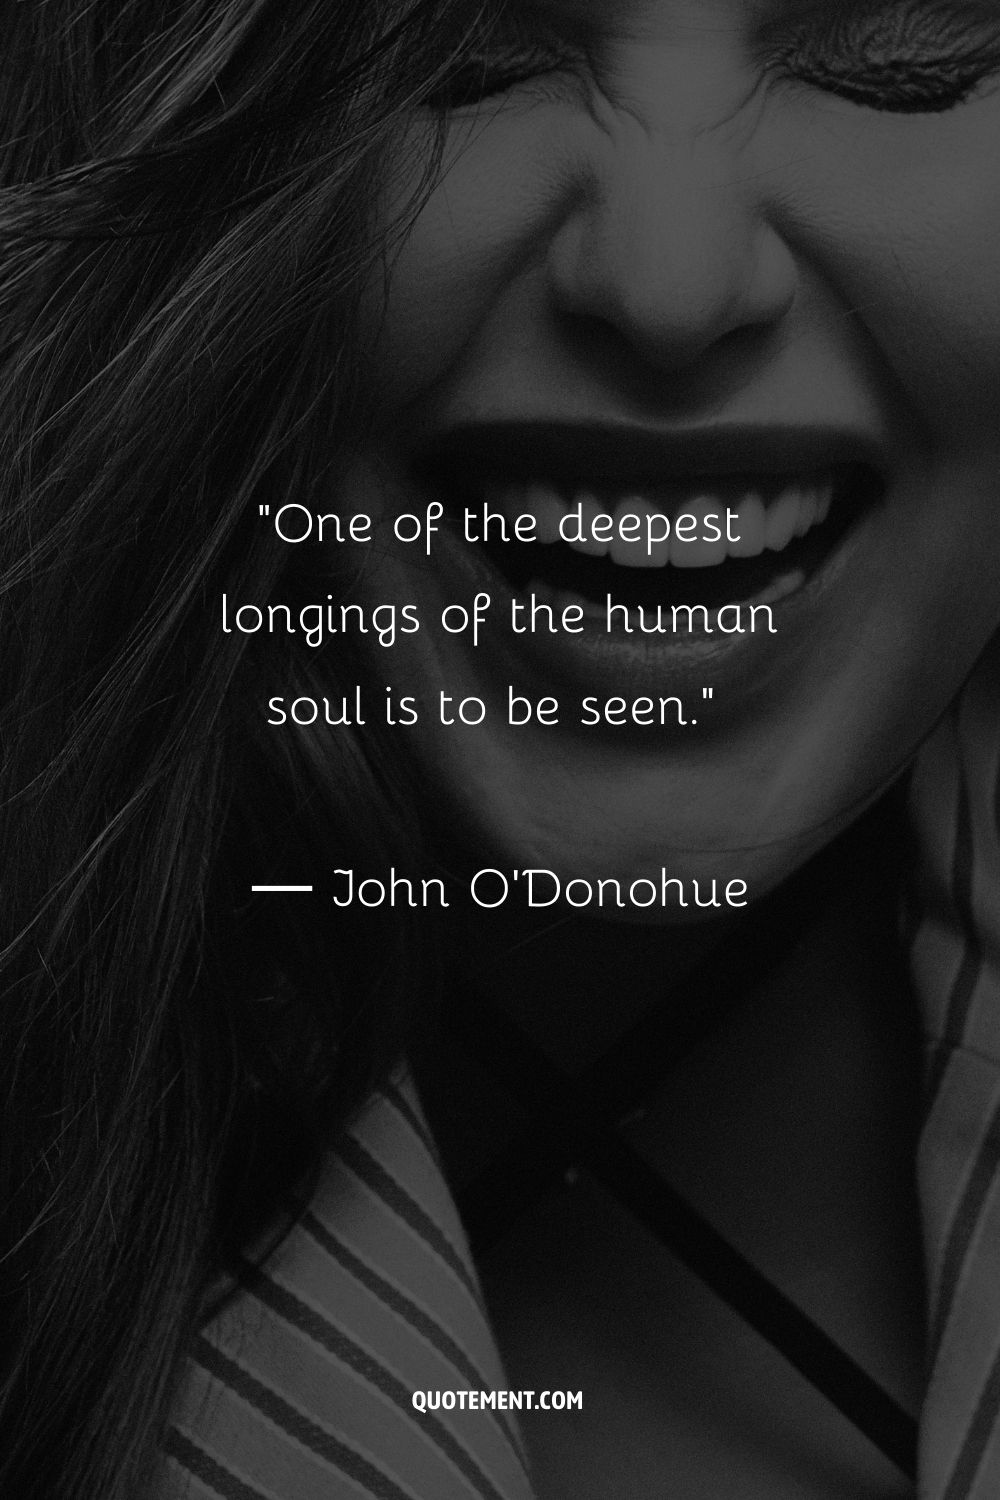 One of the deepest longings of the human soul is to be seen.